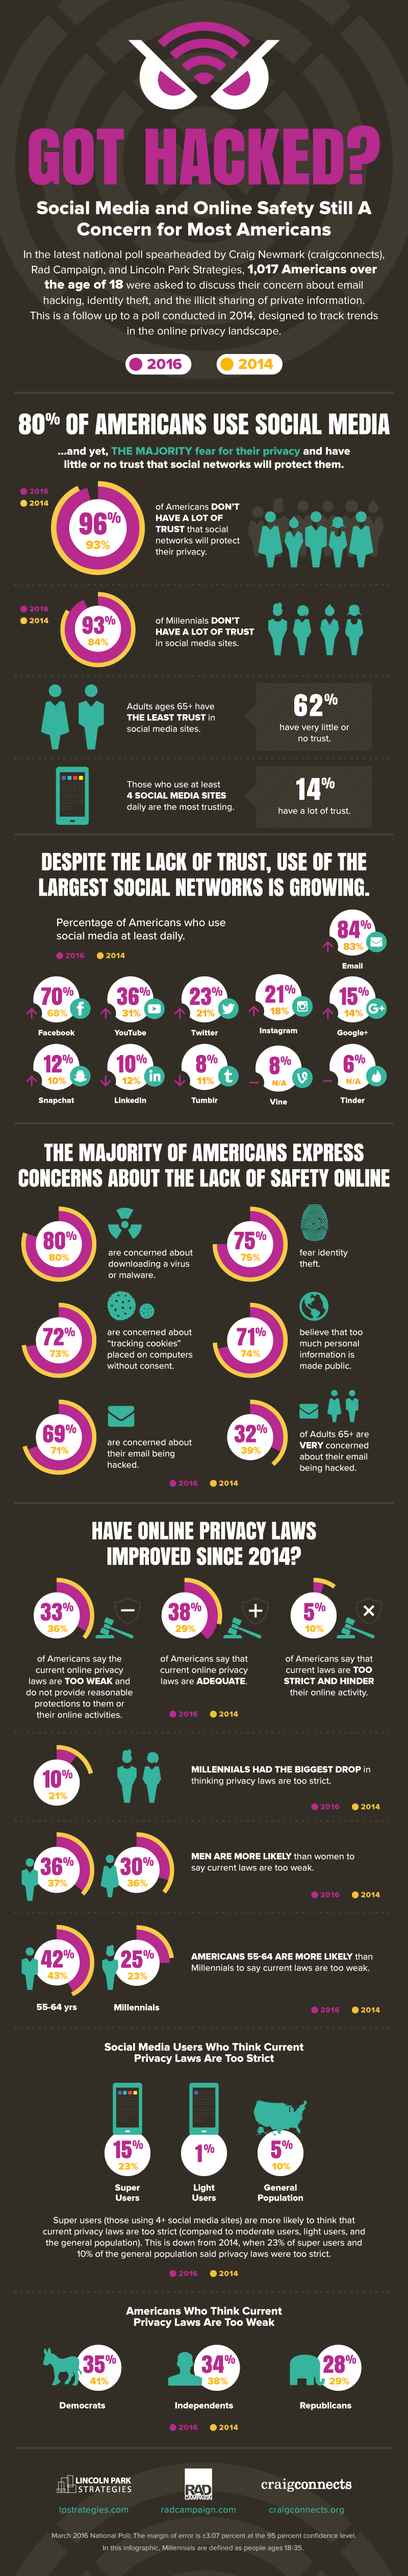 Got hacked: Social Media And Online Safety Still A Concern for Most Americans - #infographic